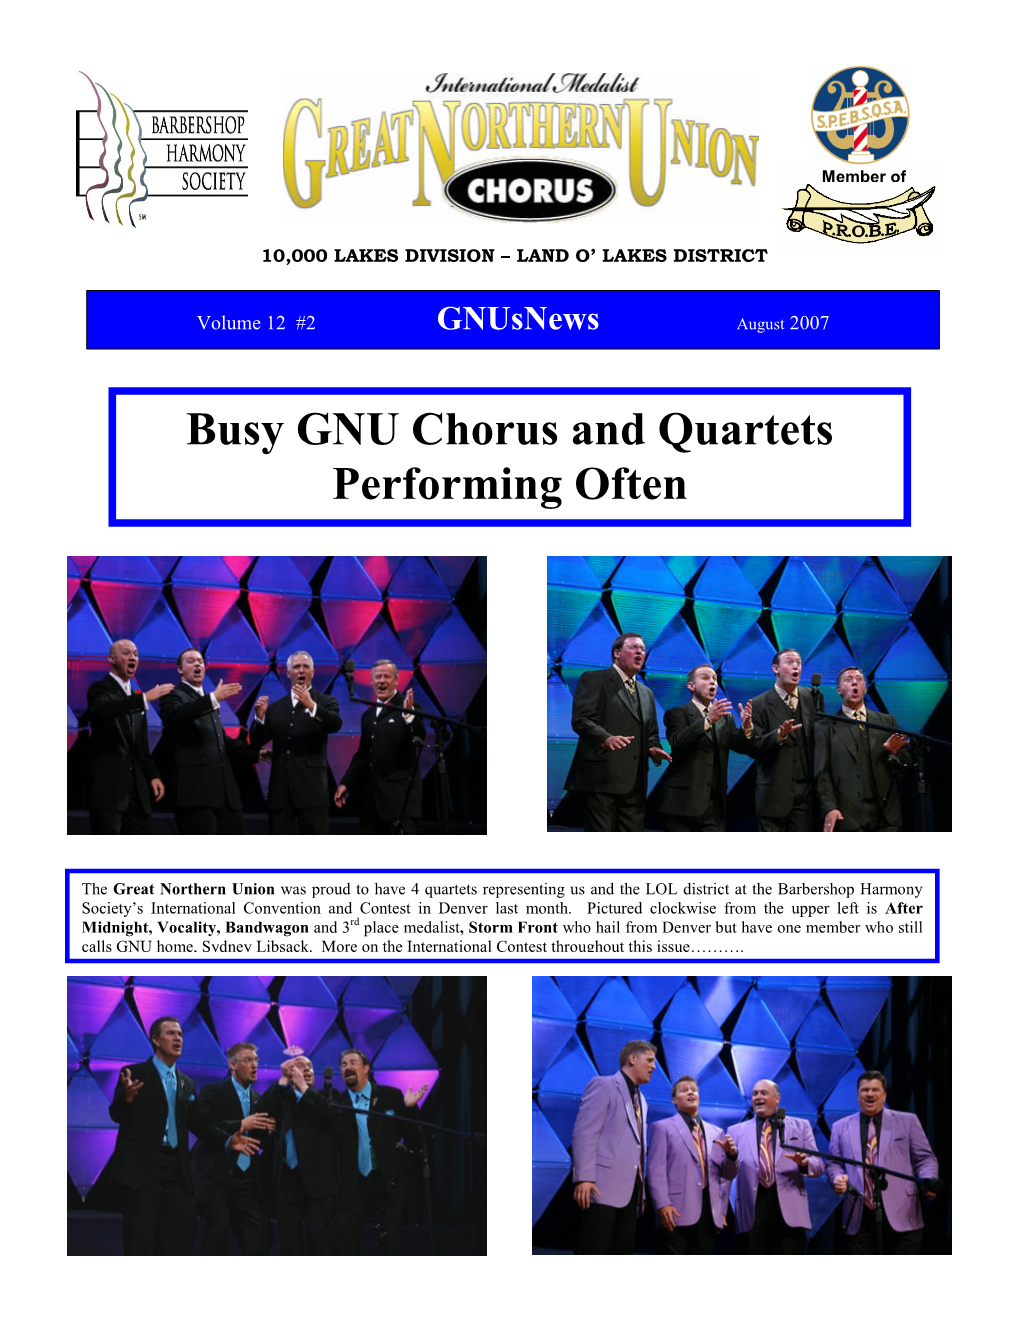 Busy GNU Chorus and Quartets Performing Often